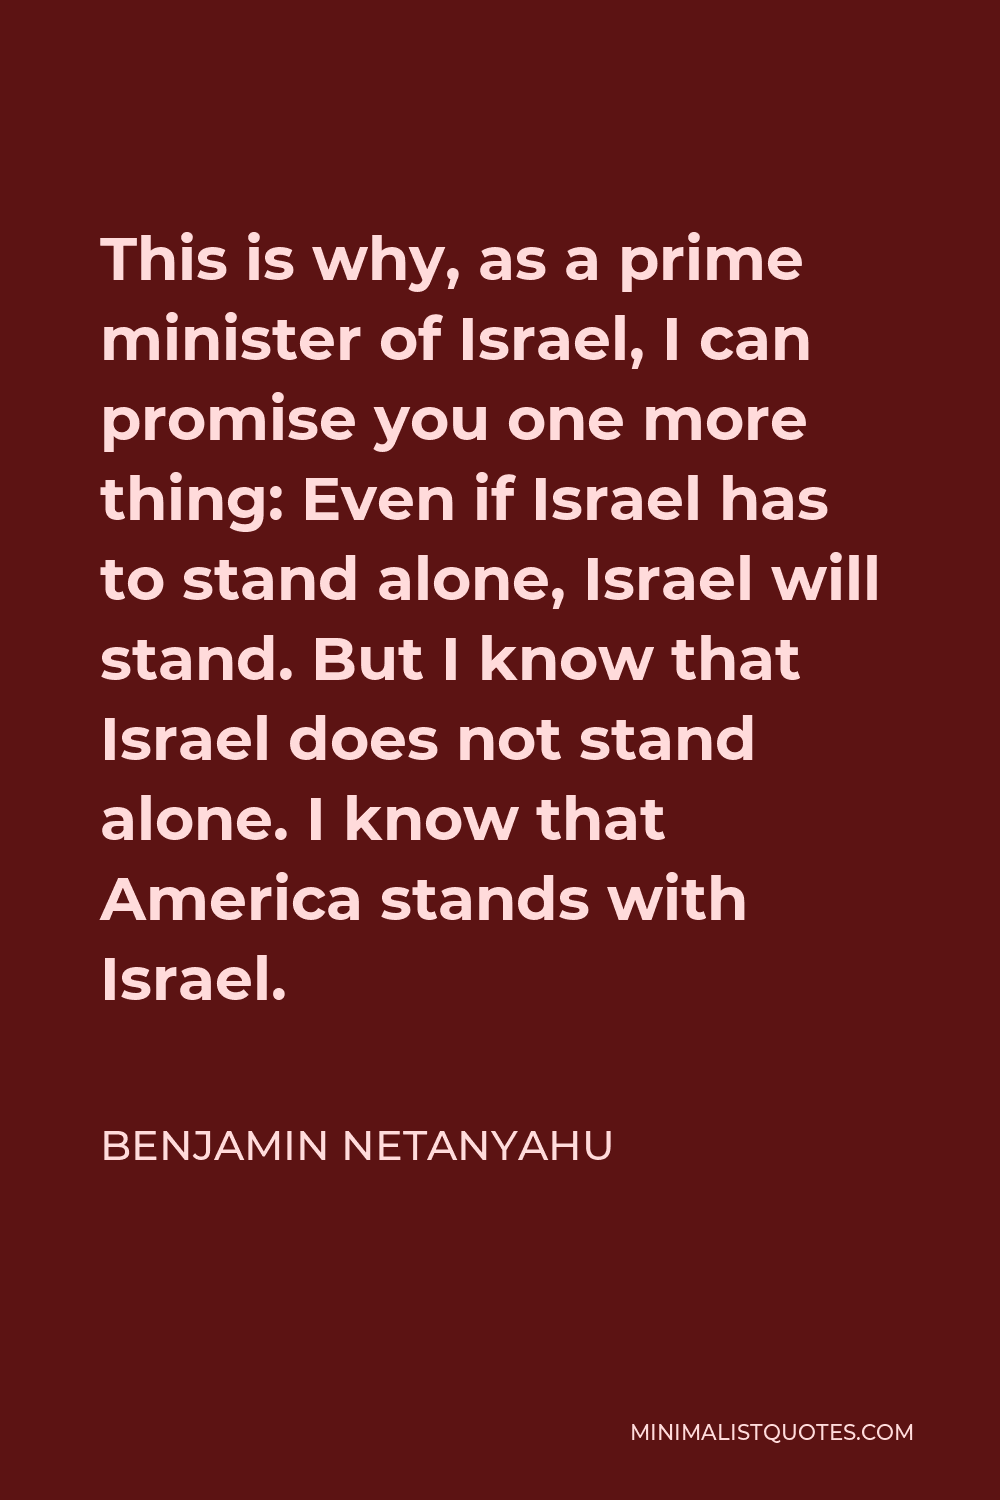 Benjamin Netanyahu Quote - This is why, as a prime minister of Israel, I can promise you one more thing: Even if Israel has to stand alone, Israel will stand. But I know that Israel does not stand alone. I know that America stands with Israel.